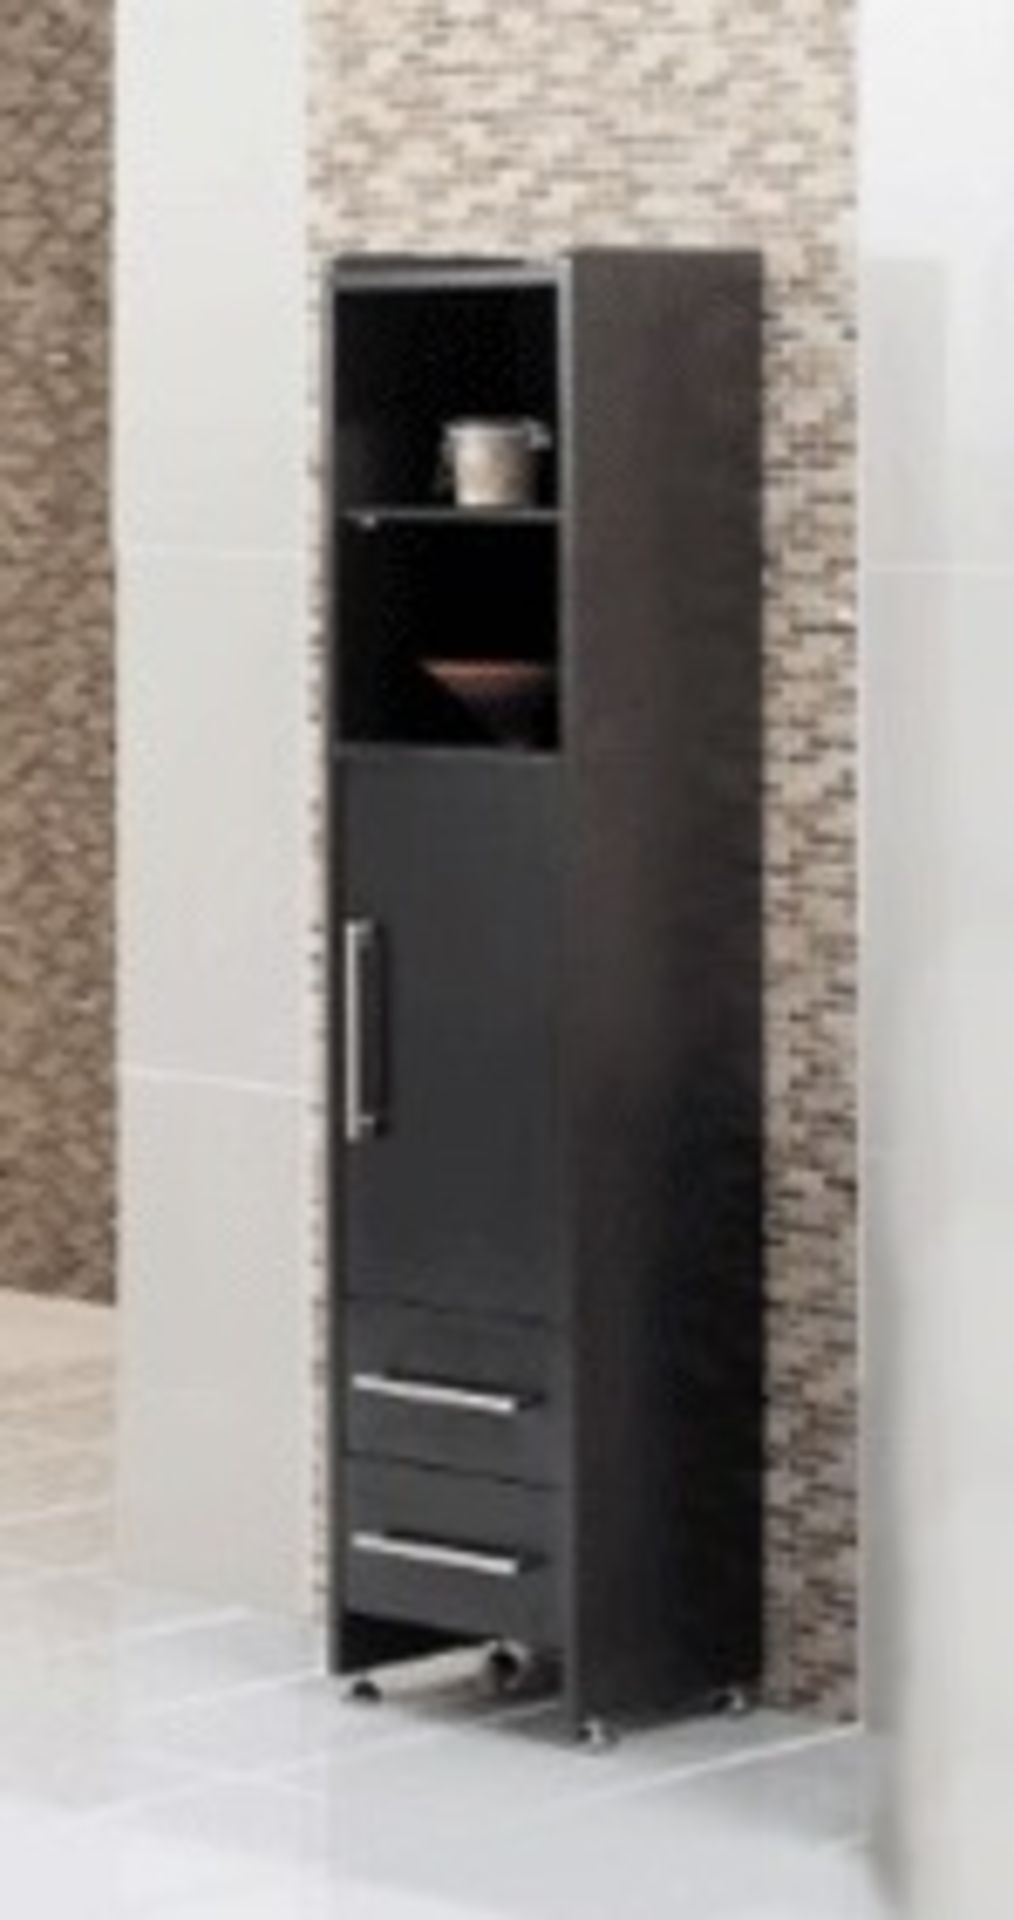 1 x Vogue ARC Bathroom Series 2 Tall Boy Unit - WENGE - Contemporary Design - Manufactured to the